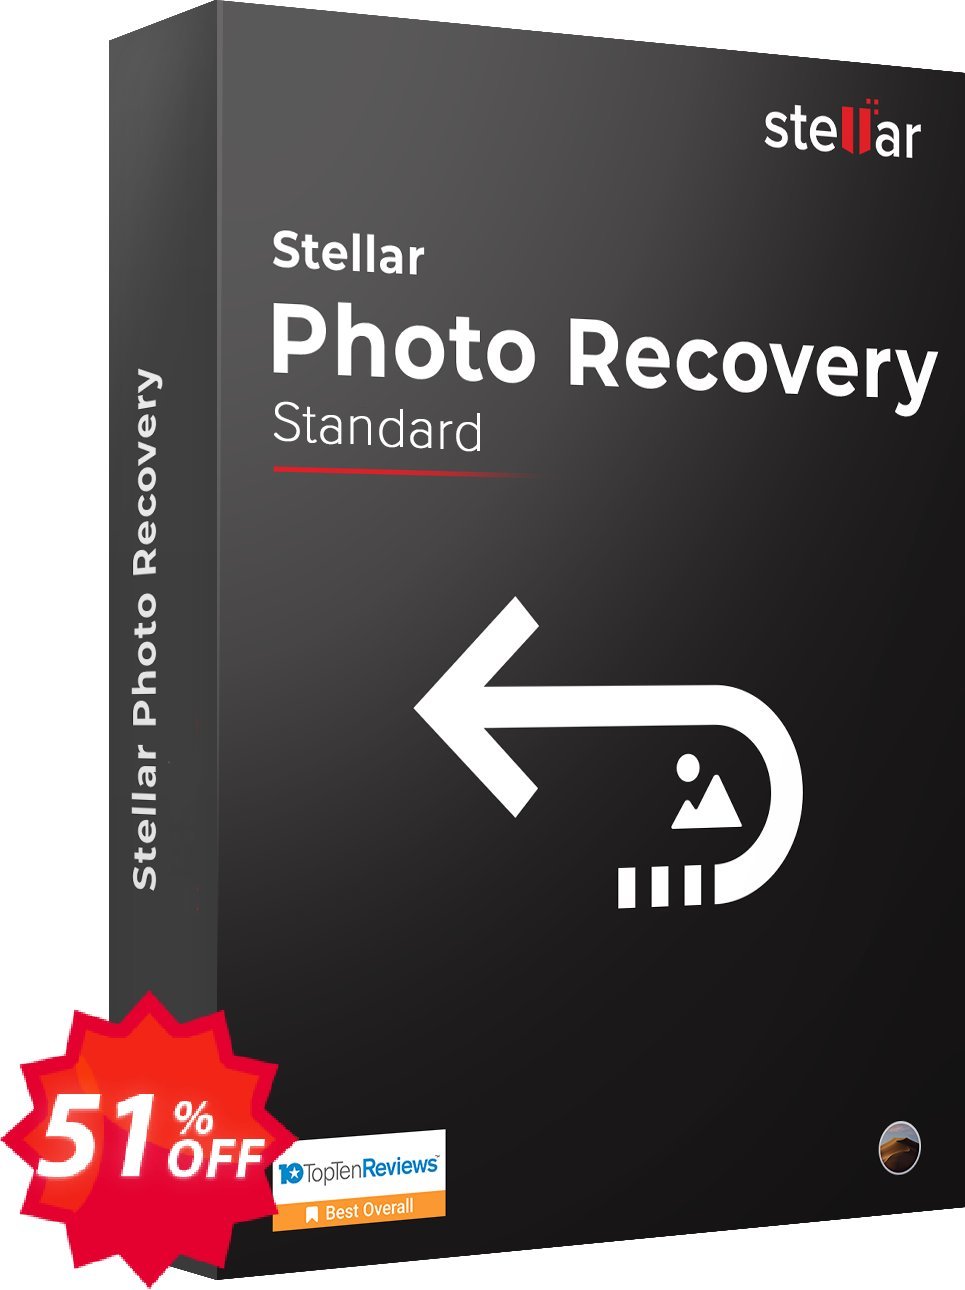 Stellar Photo Recovery for MAC Coupon code 51% discount 